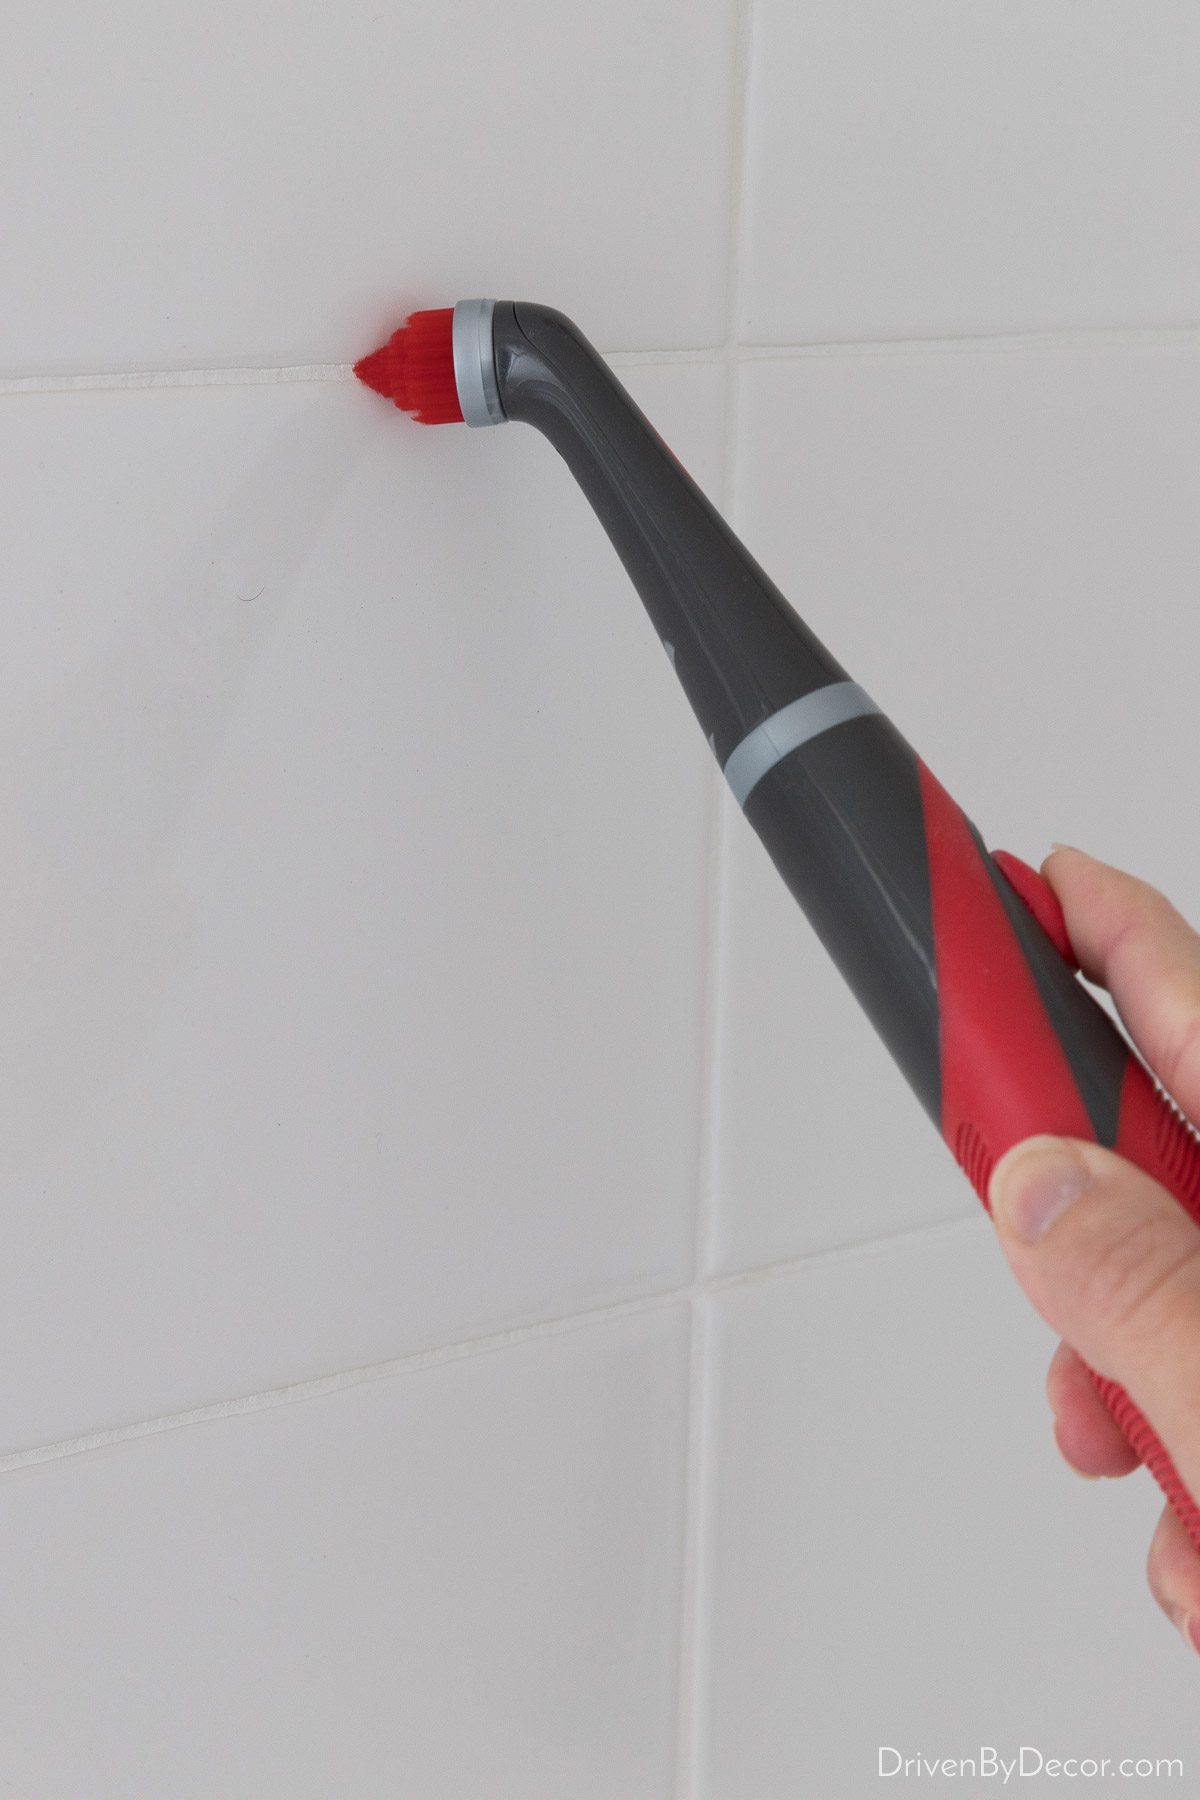 This spinning grout cleaner is one of my favorite cleaning tools!